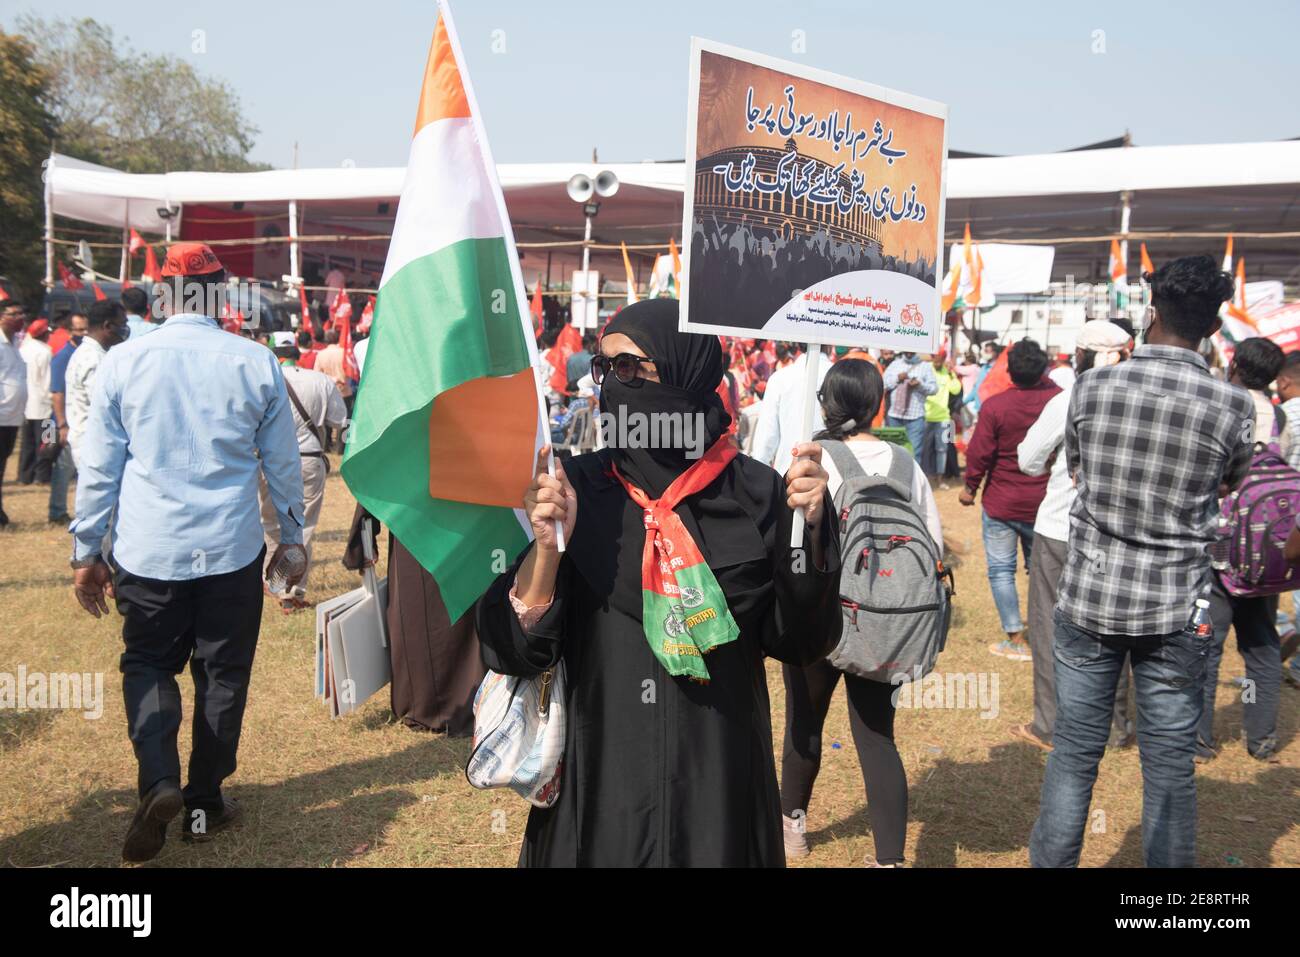 Mumbai , India - 25 January 2021, Muslim woman activists protesters in a black burqa hold up indian flag and signs in a rally at the Azad Maidan again Stock Photo